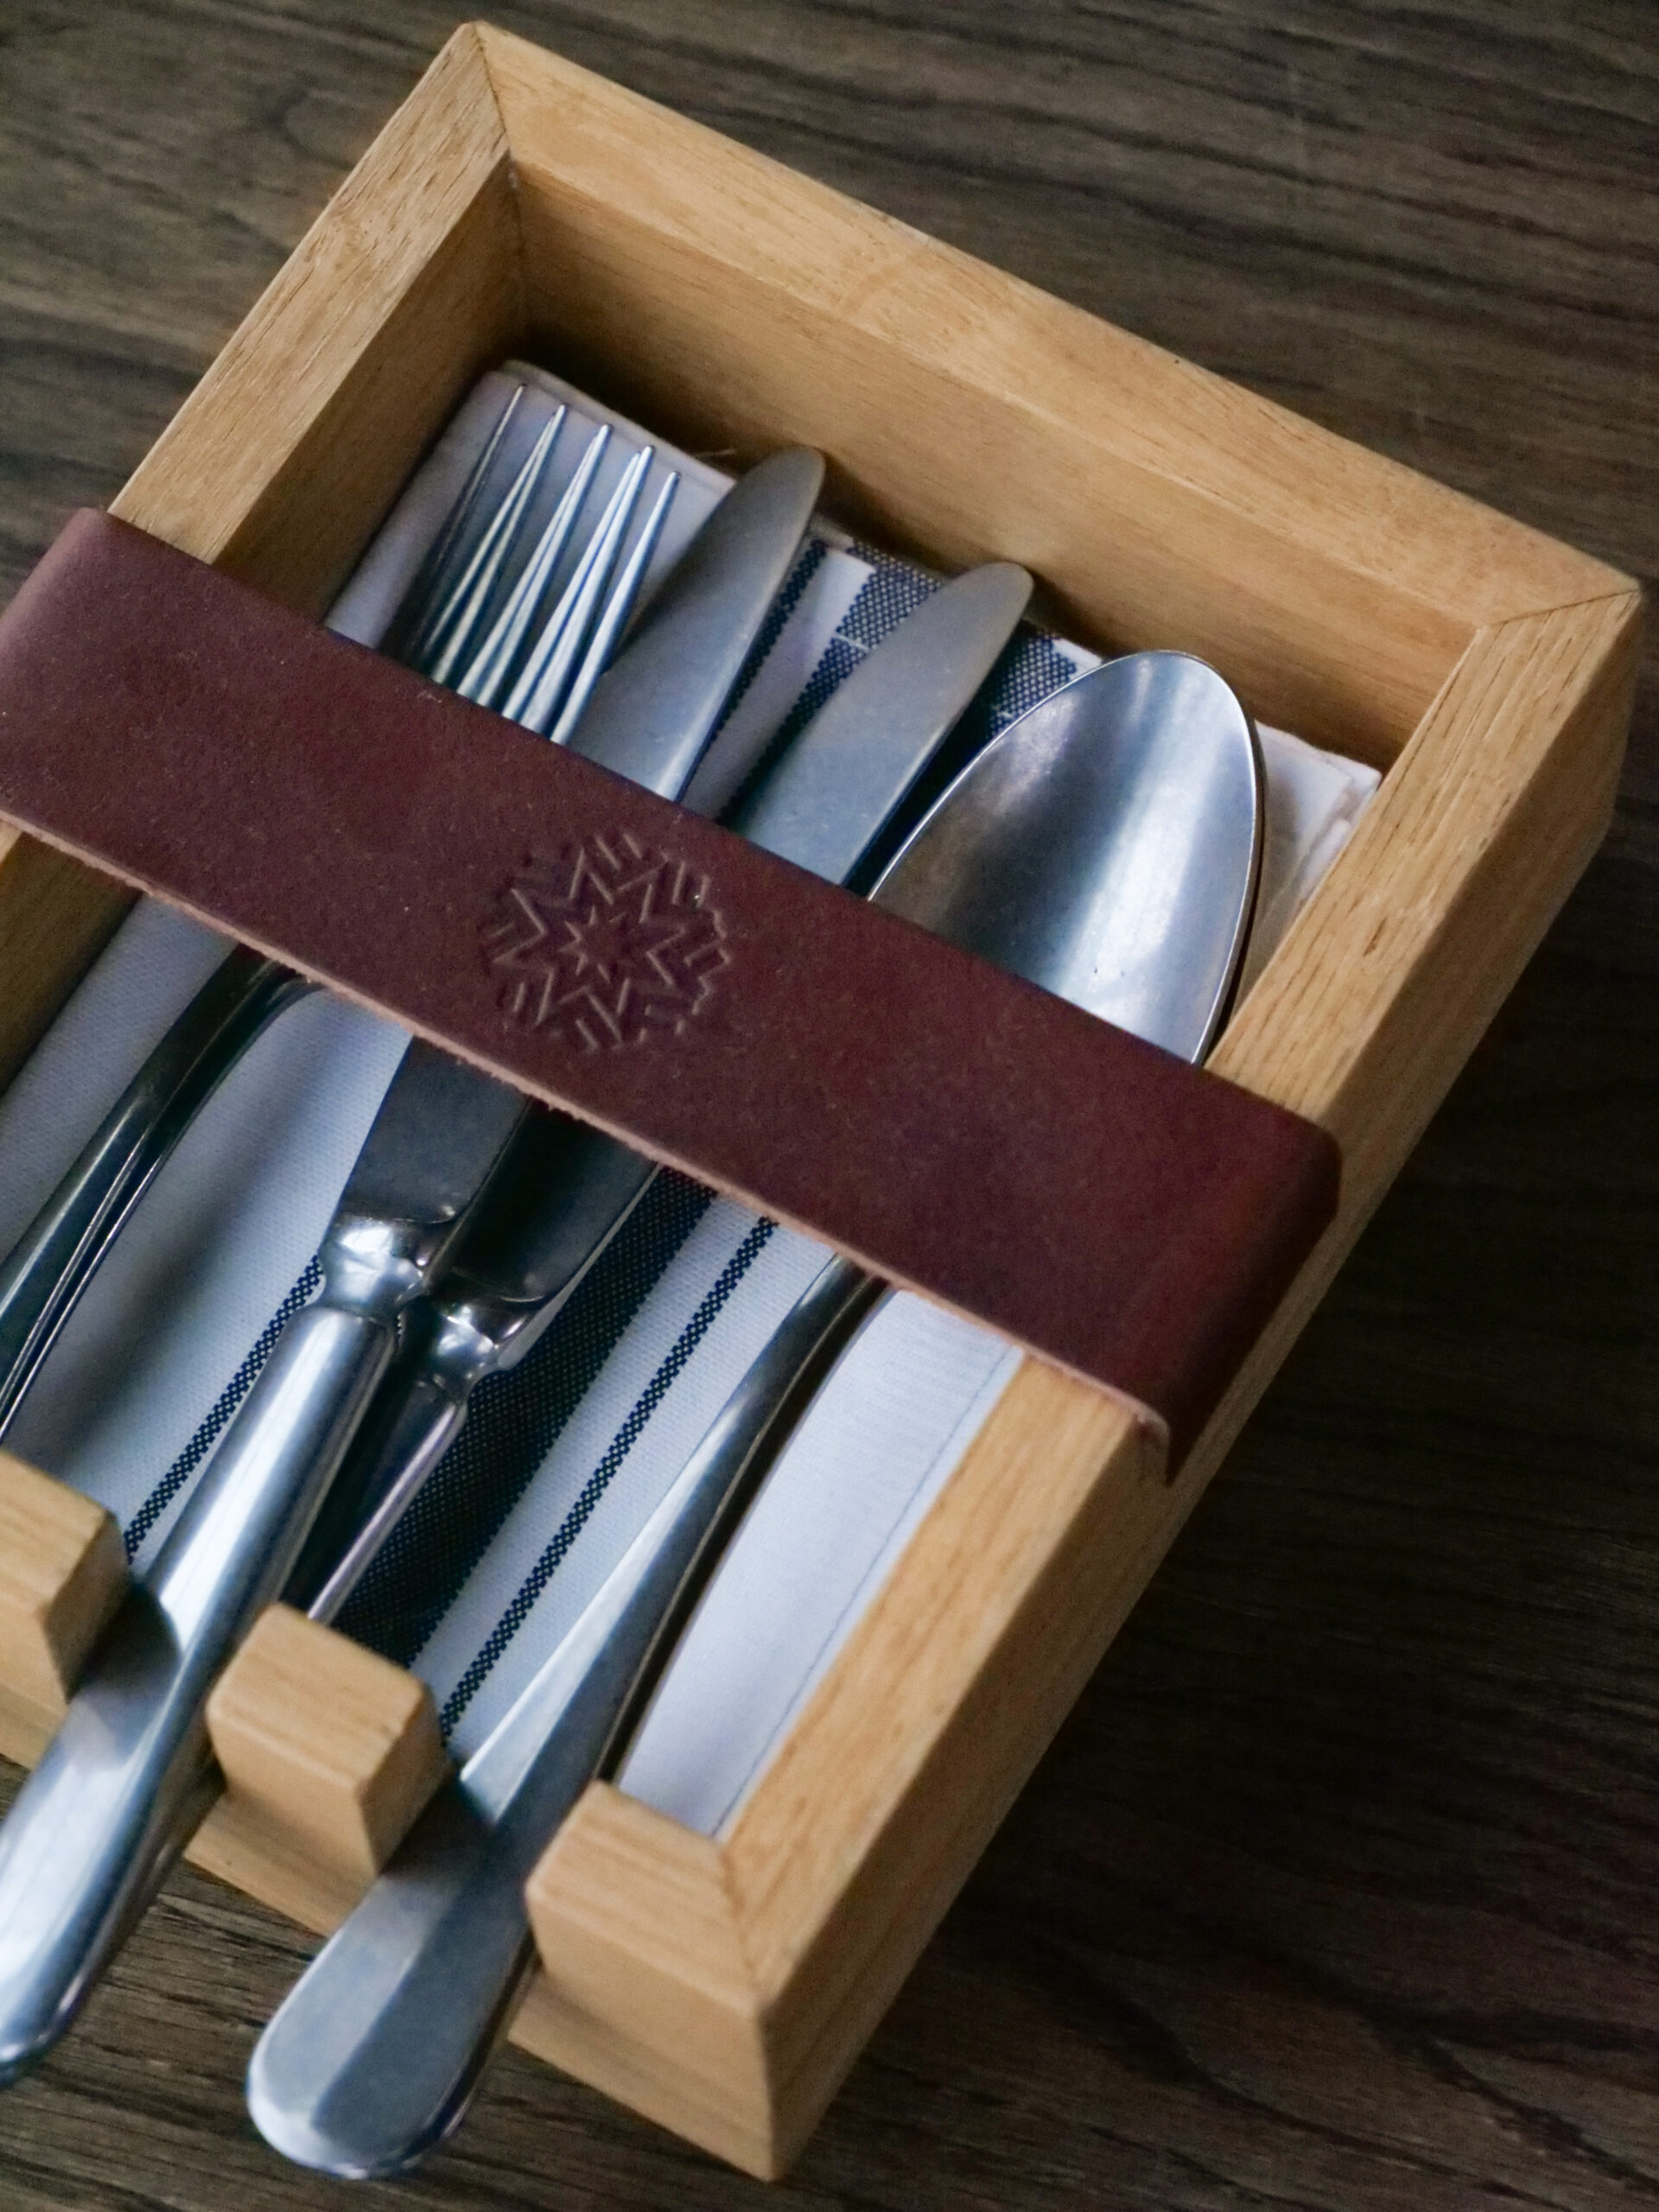 Cutlery box with a leather strap